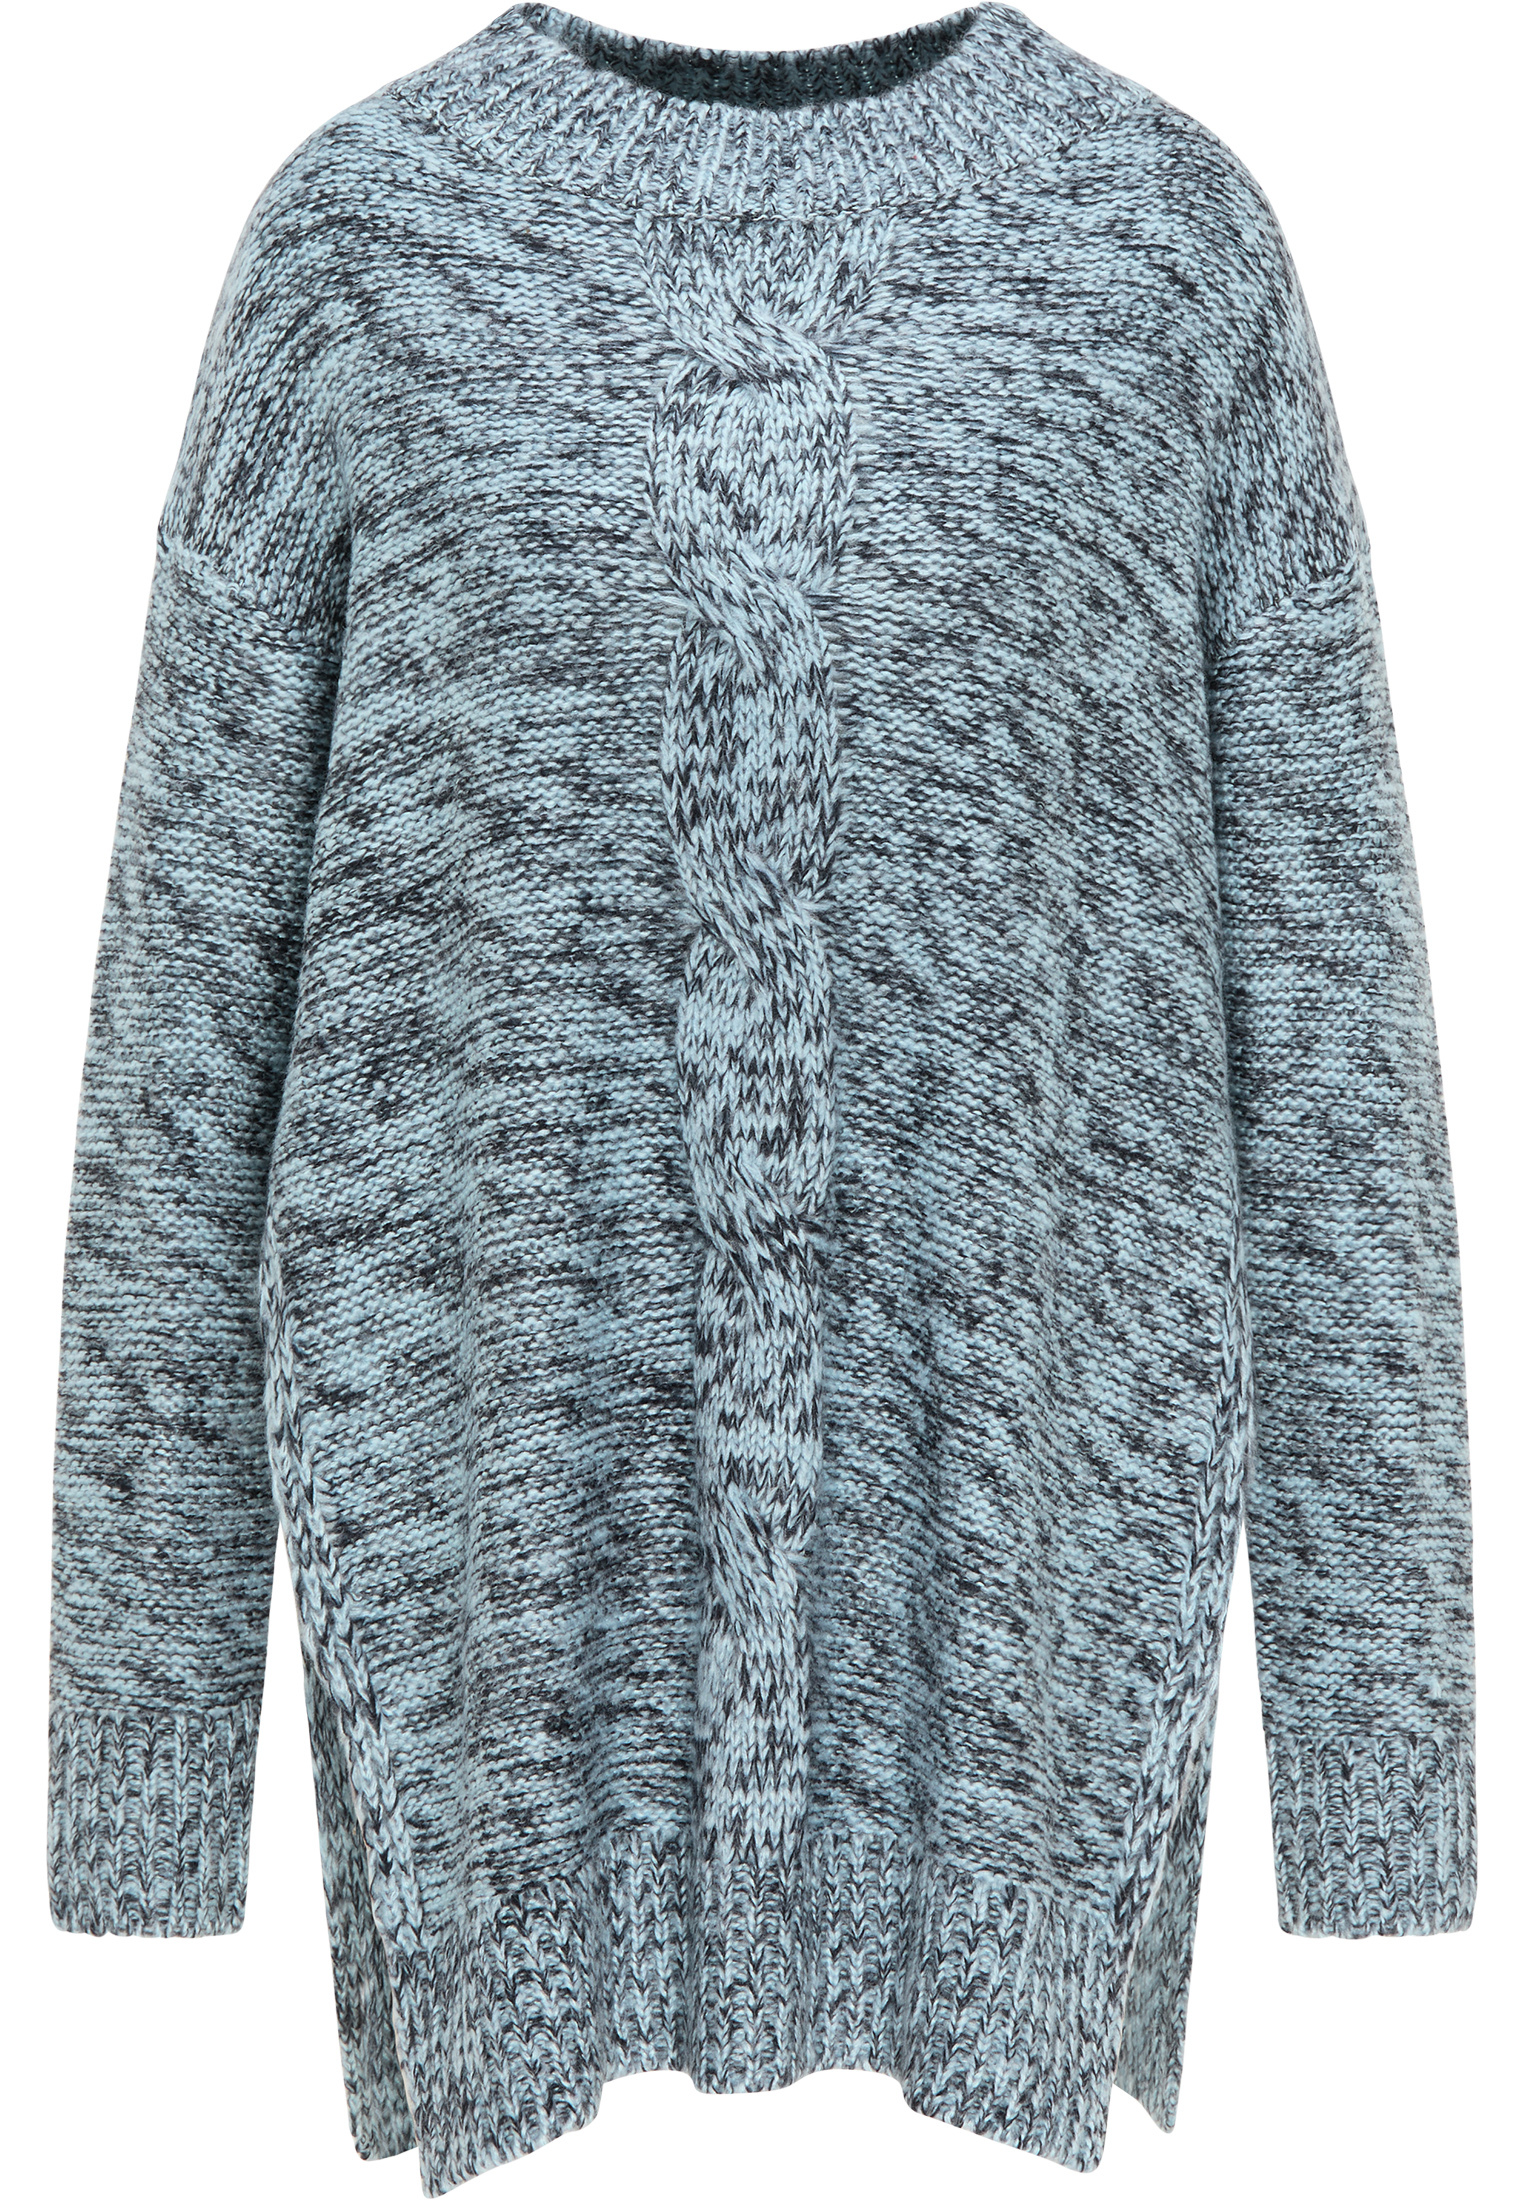 Donna R3R0x MYMO Pullover extra large in Blu Notte, Opale 